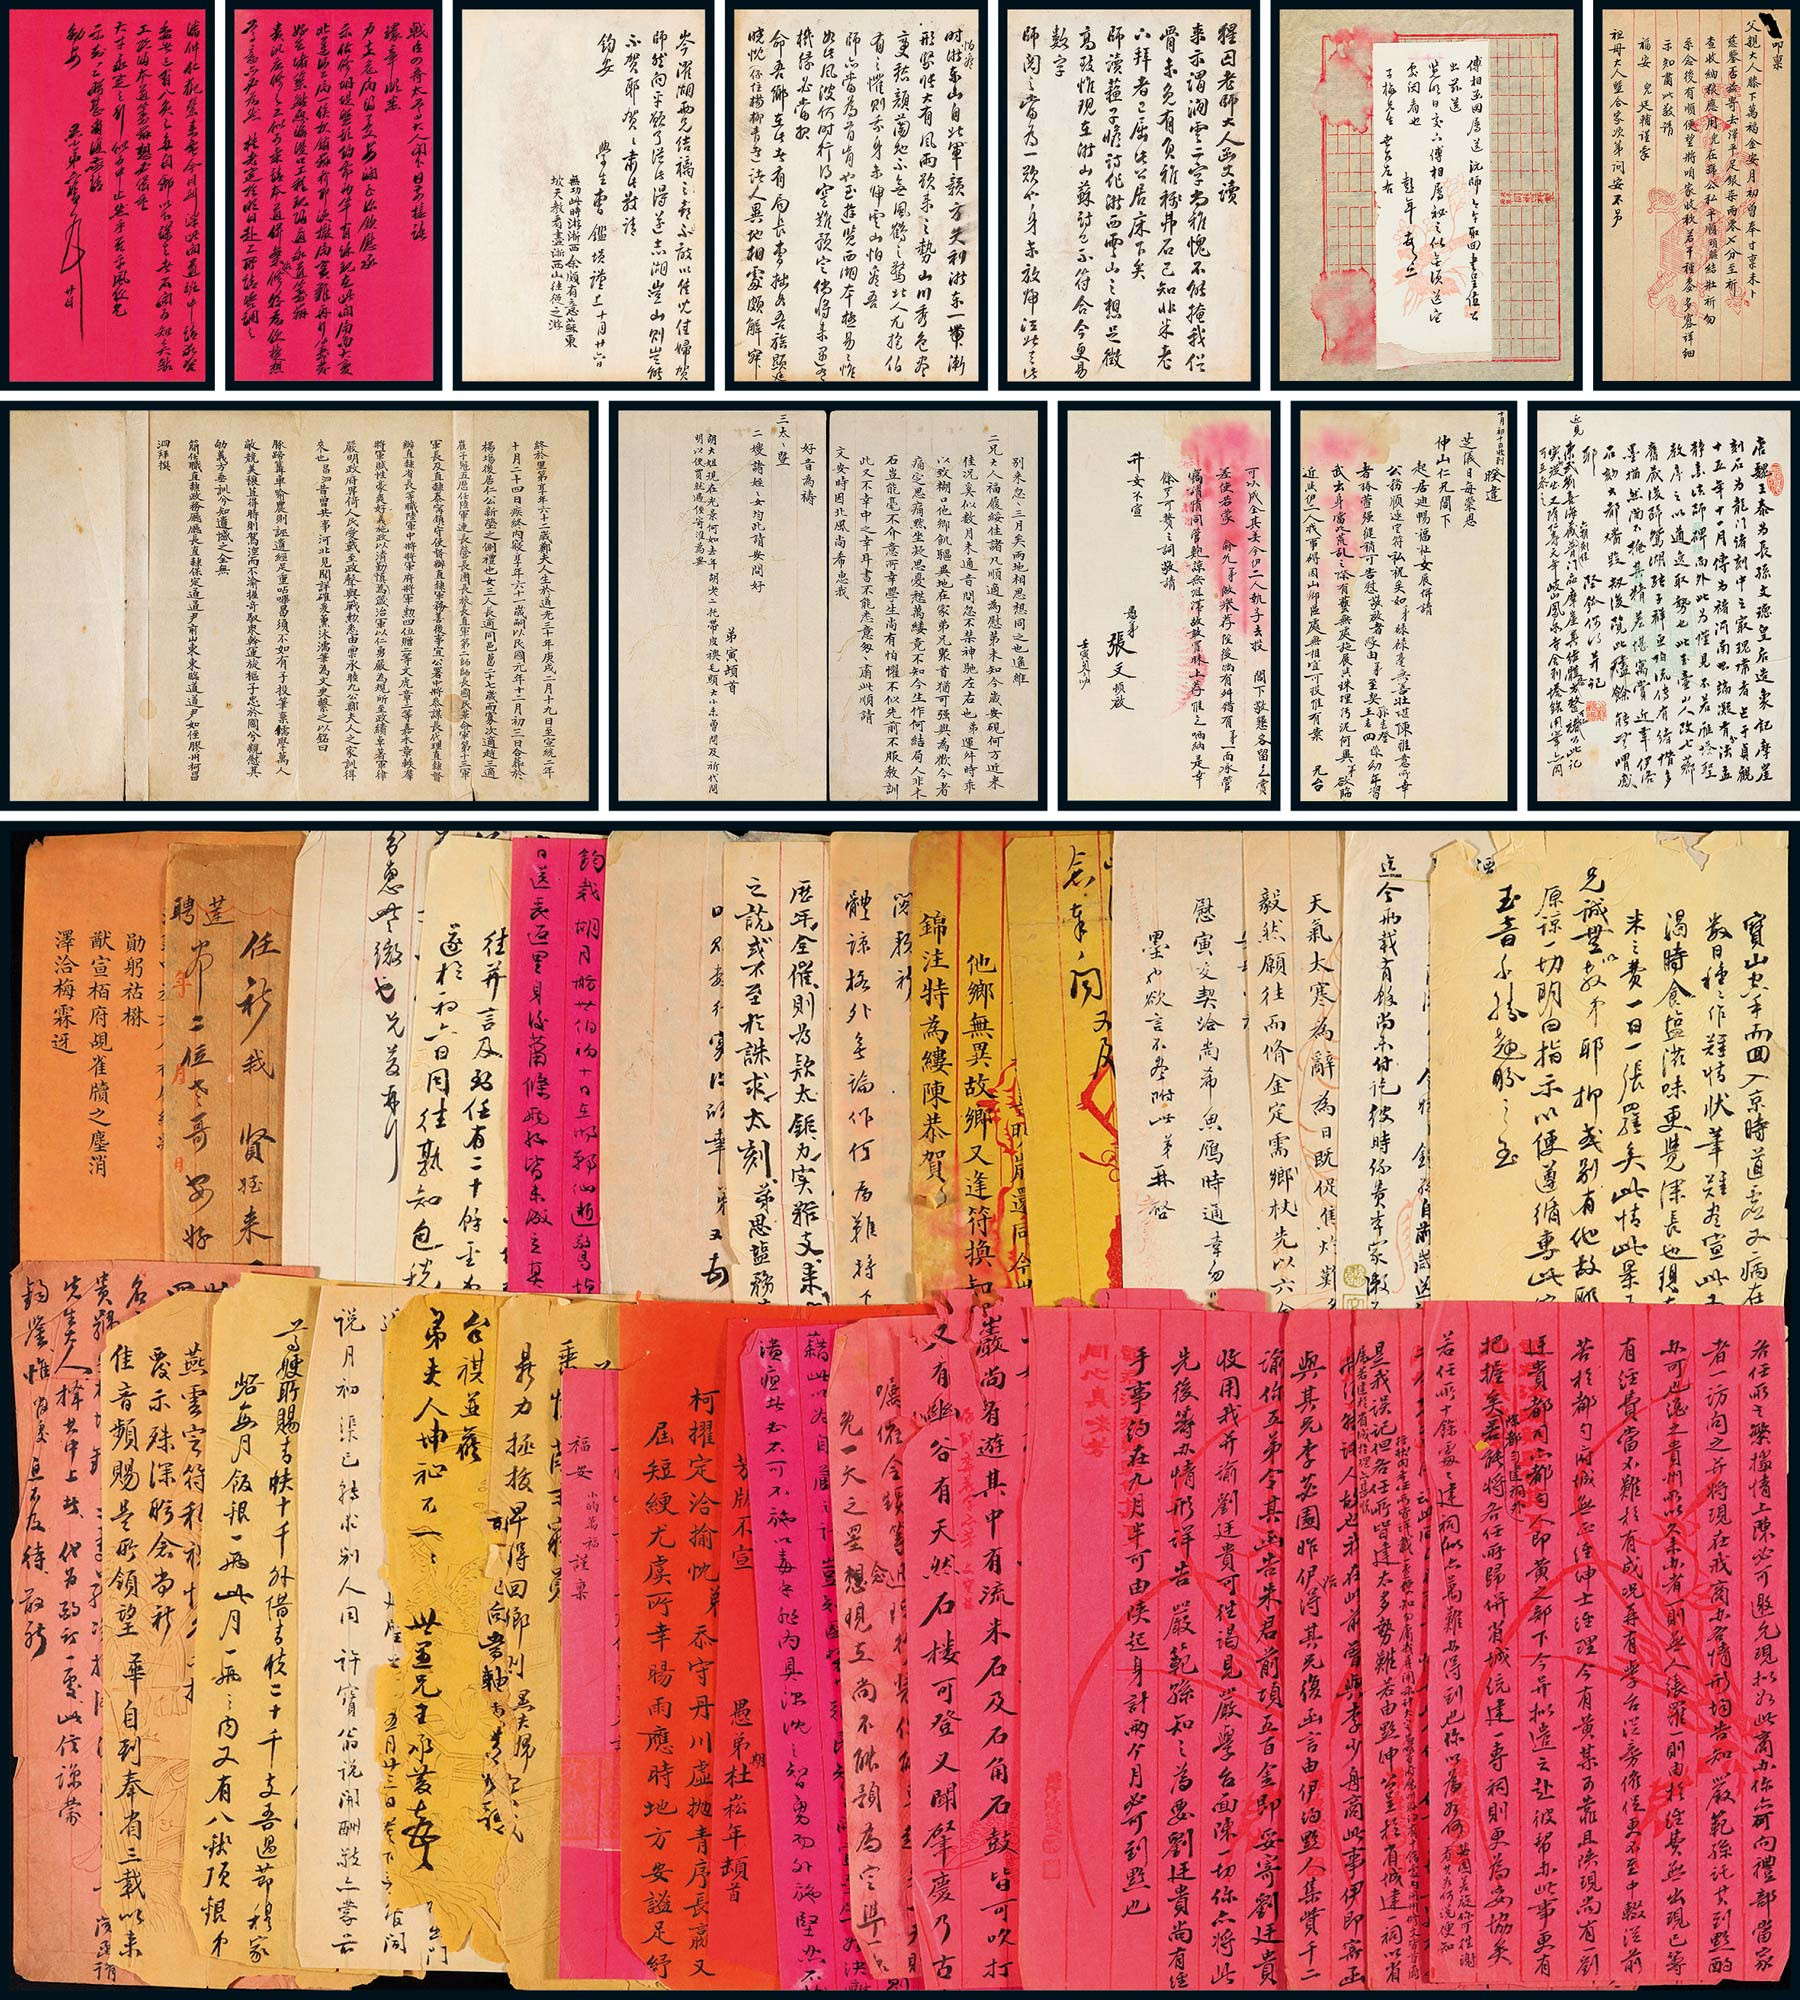 Letters from Du Baoshan, etc., of the Qing Dynasty 45 pages in 1 set